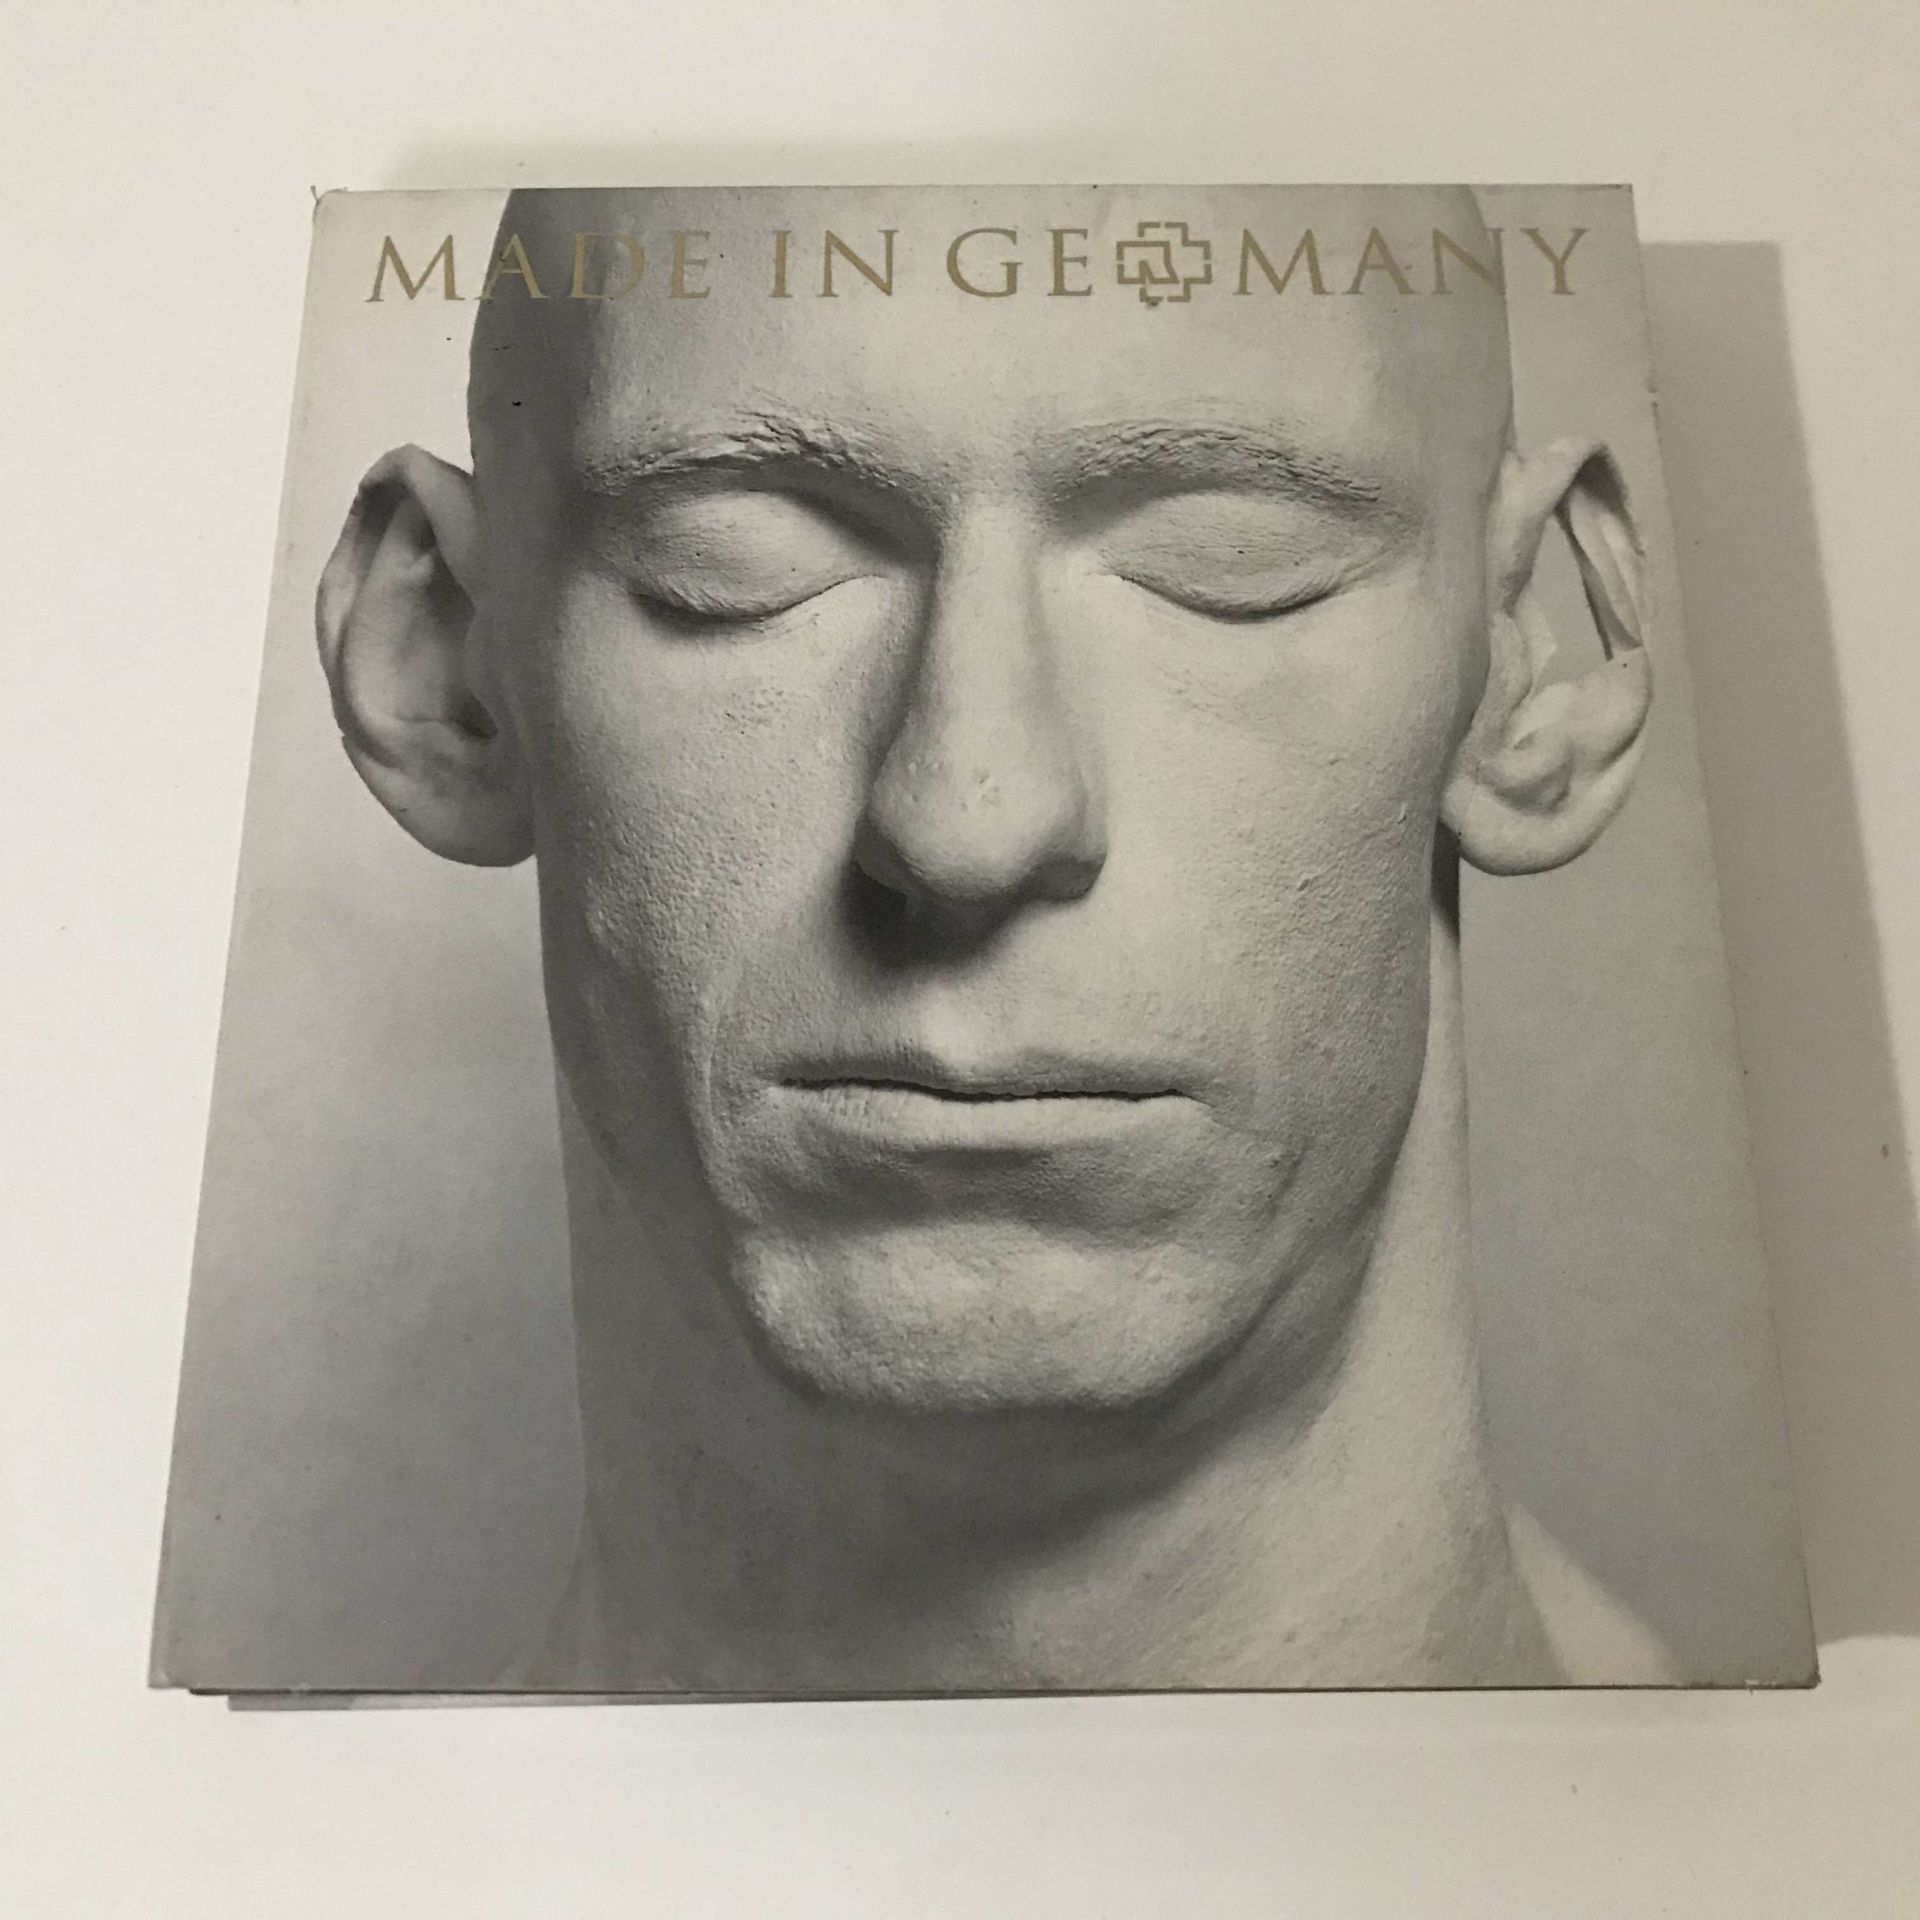 Rammstein – Made In Germany (1995-2011) 2 CD